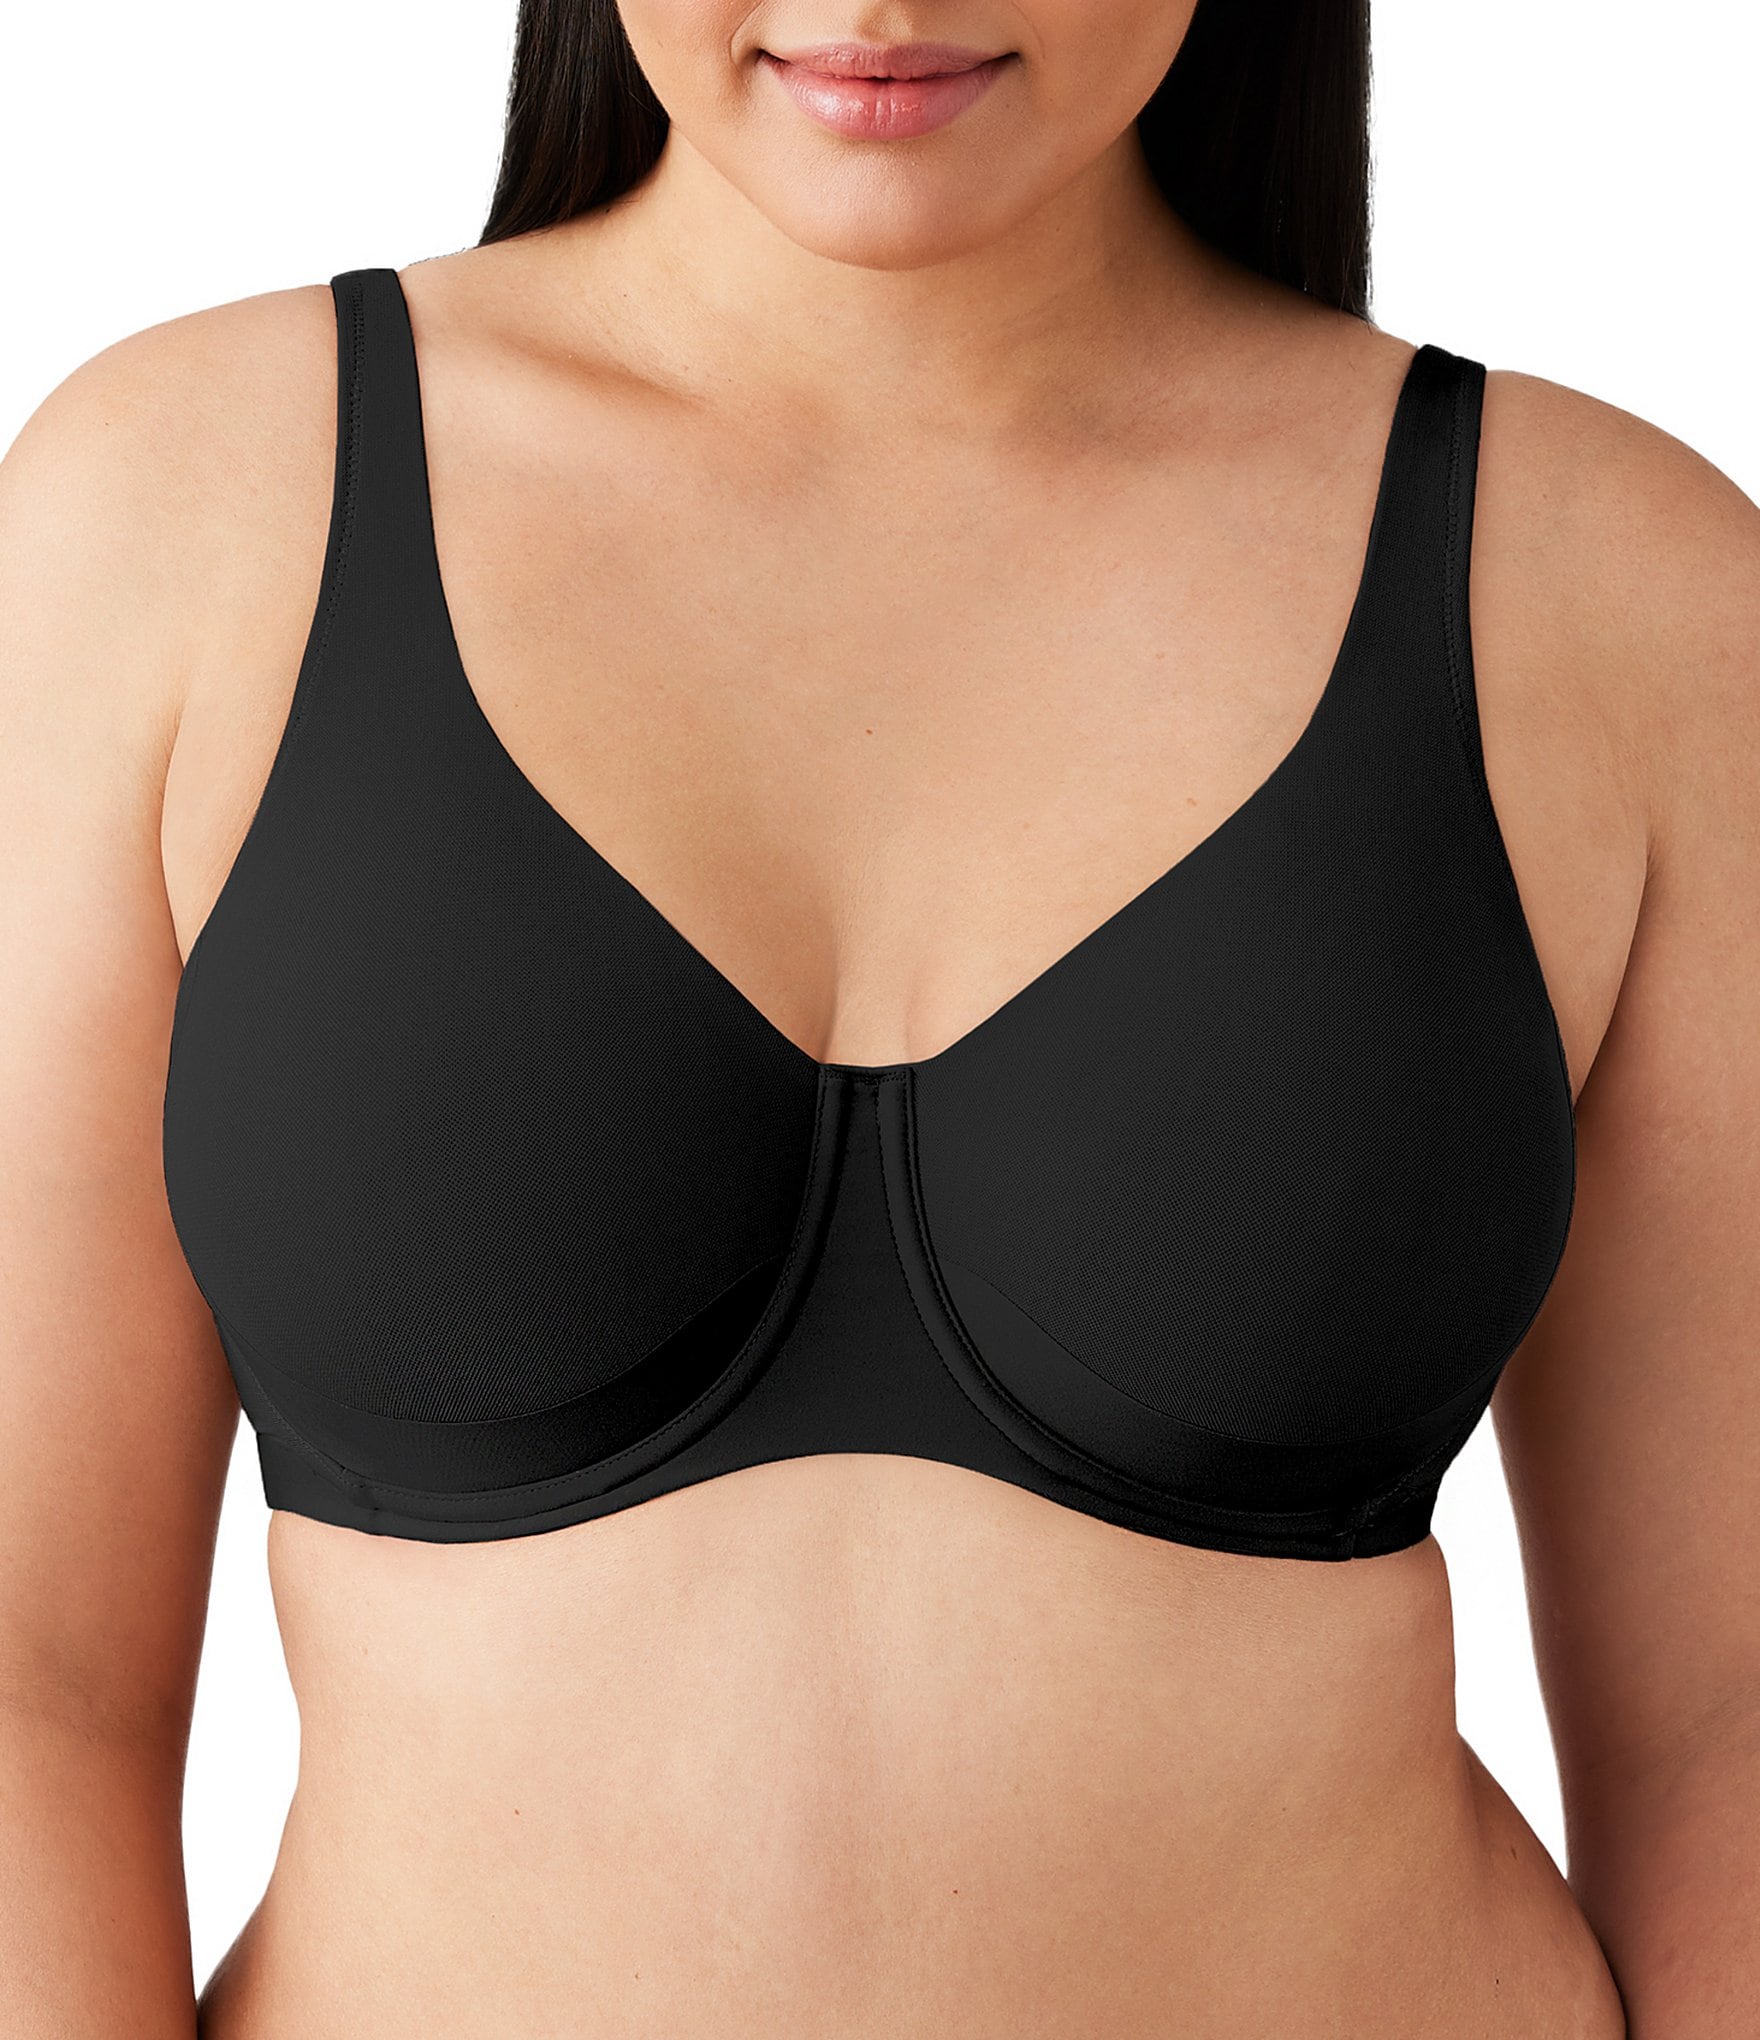 Wacoal's Latest Intimates Collection Says Breast Shape Matters